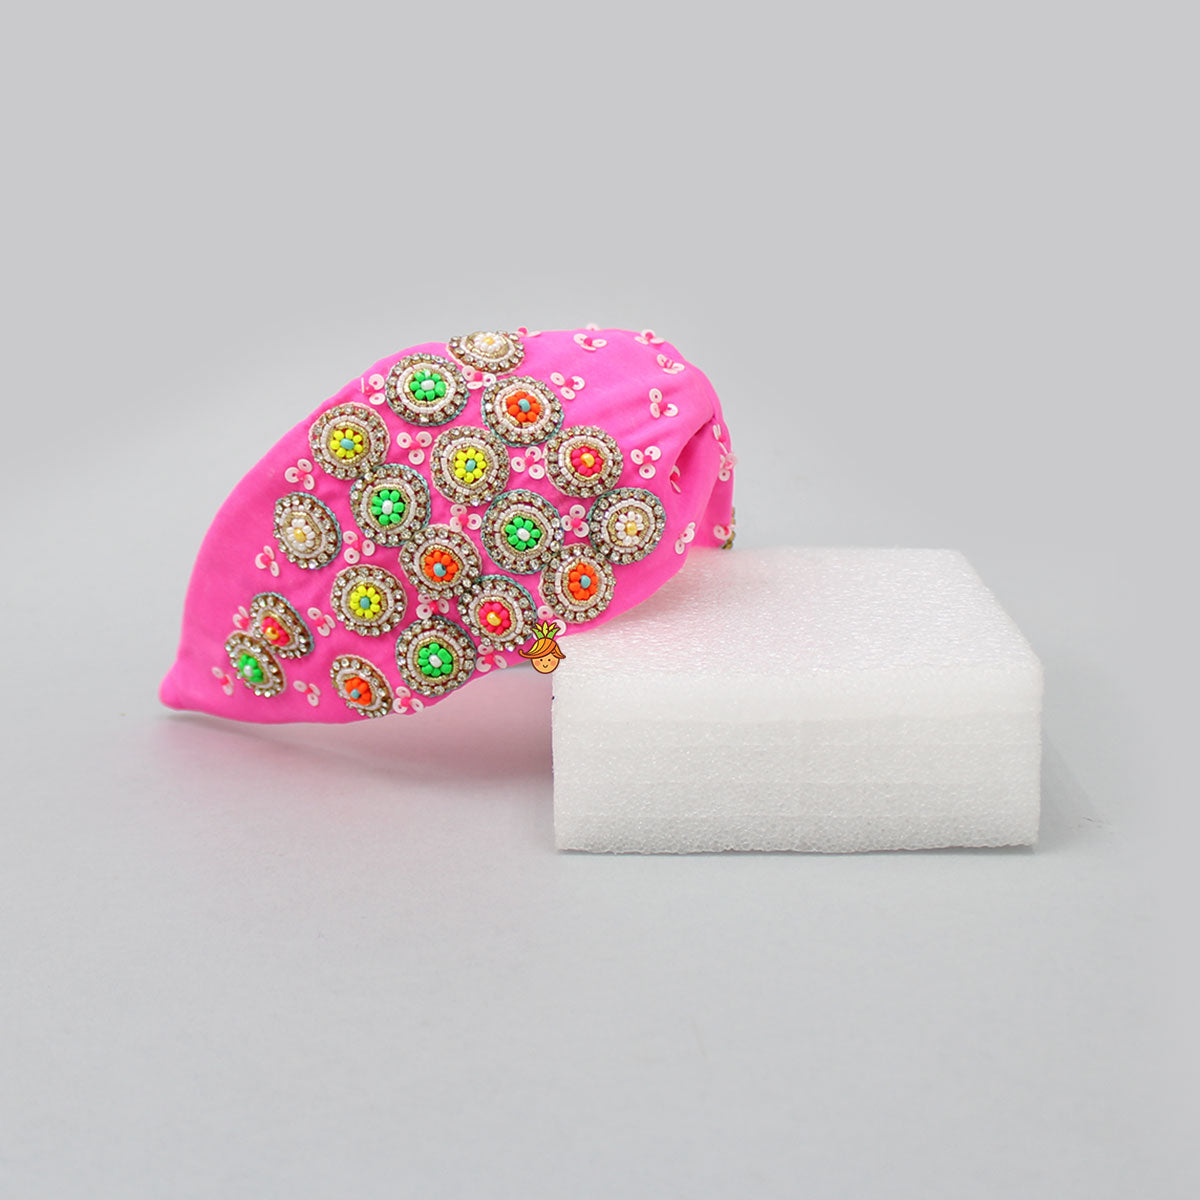 French Crepe Circle Embroidered Pink Hair Band